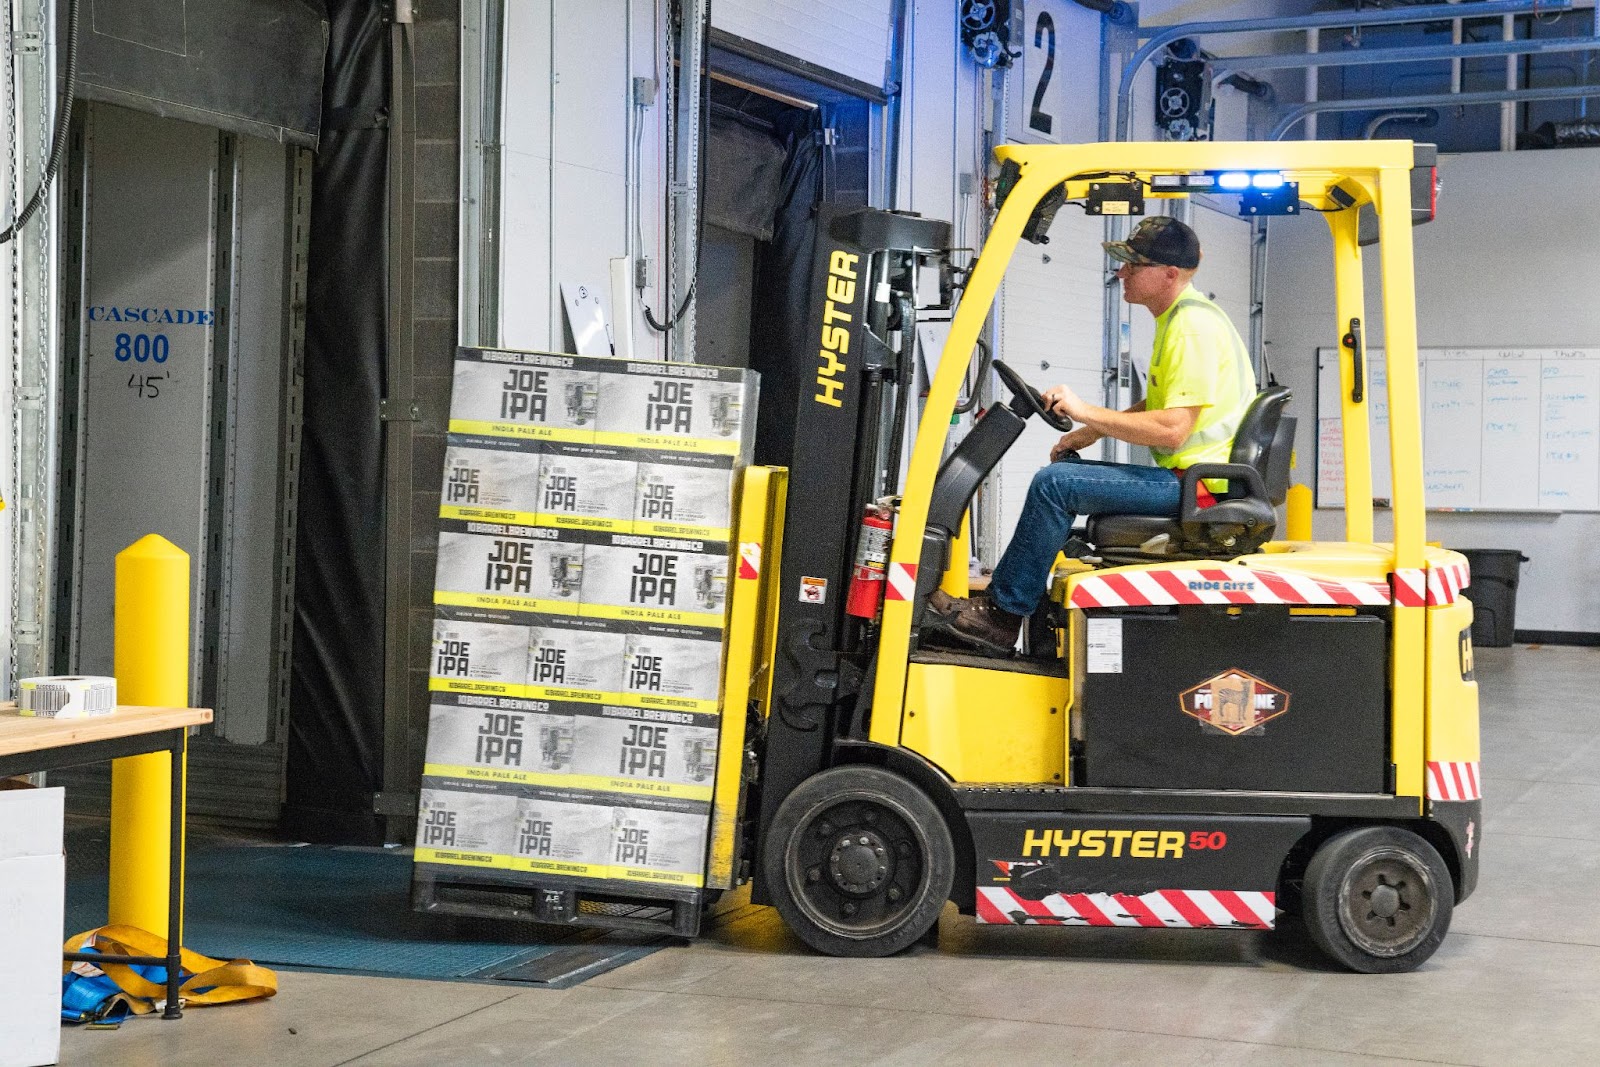 A class-IV forklift lifting crates of IPA beer